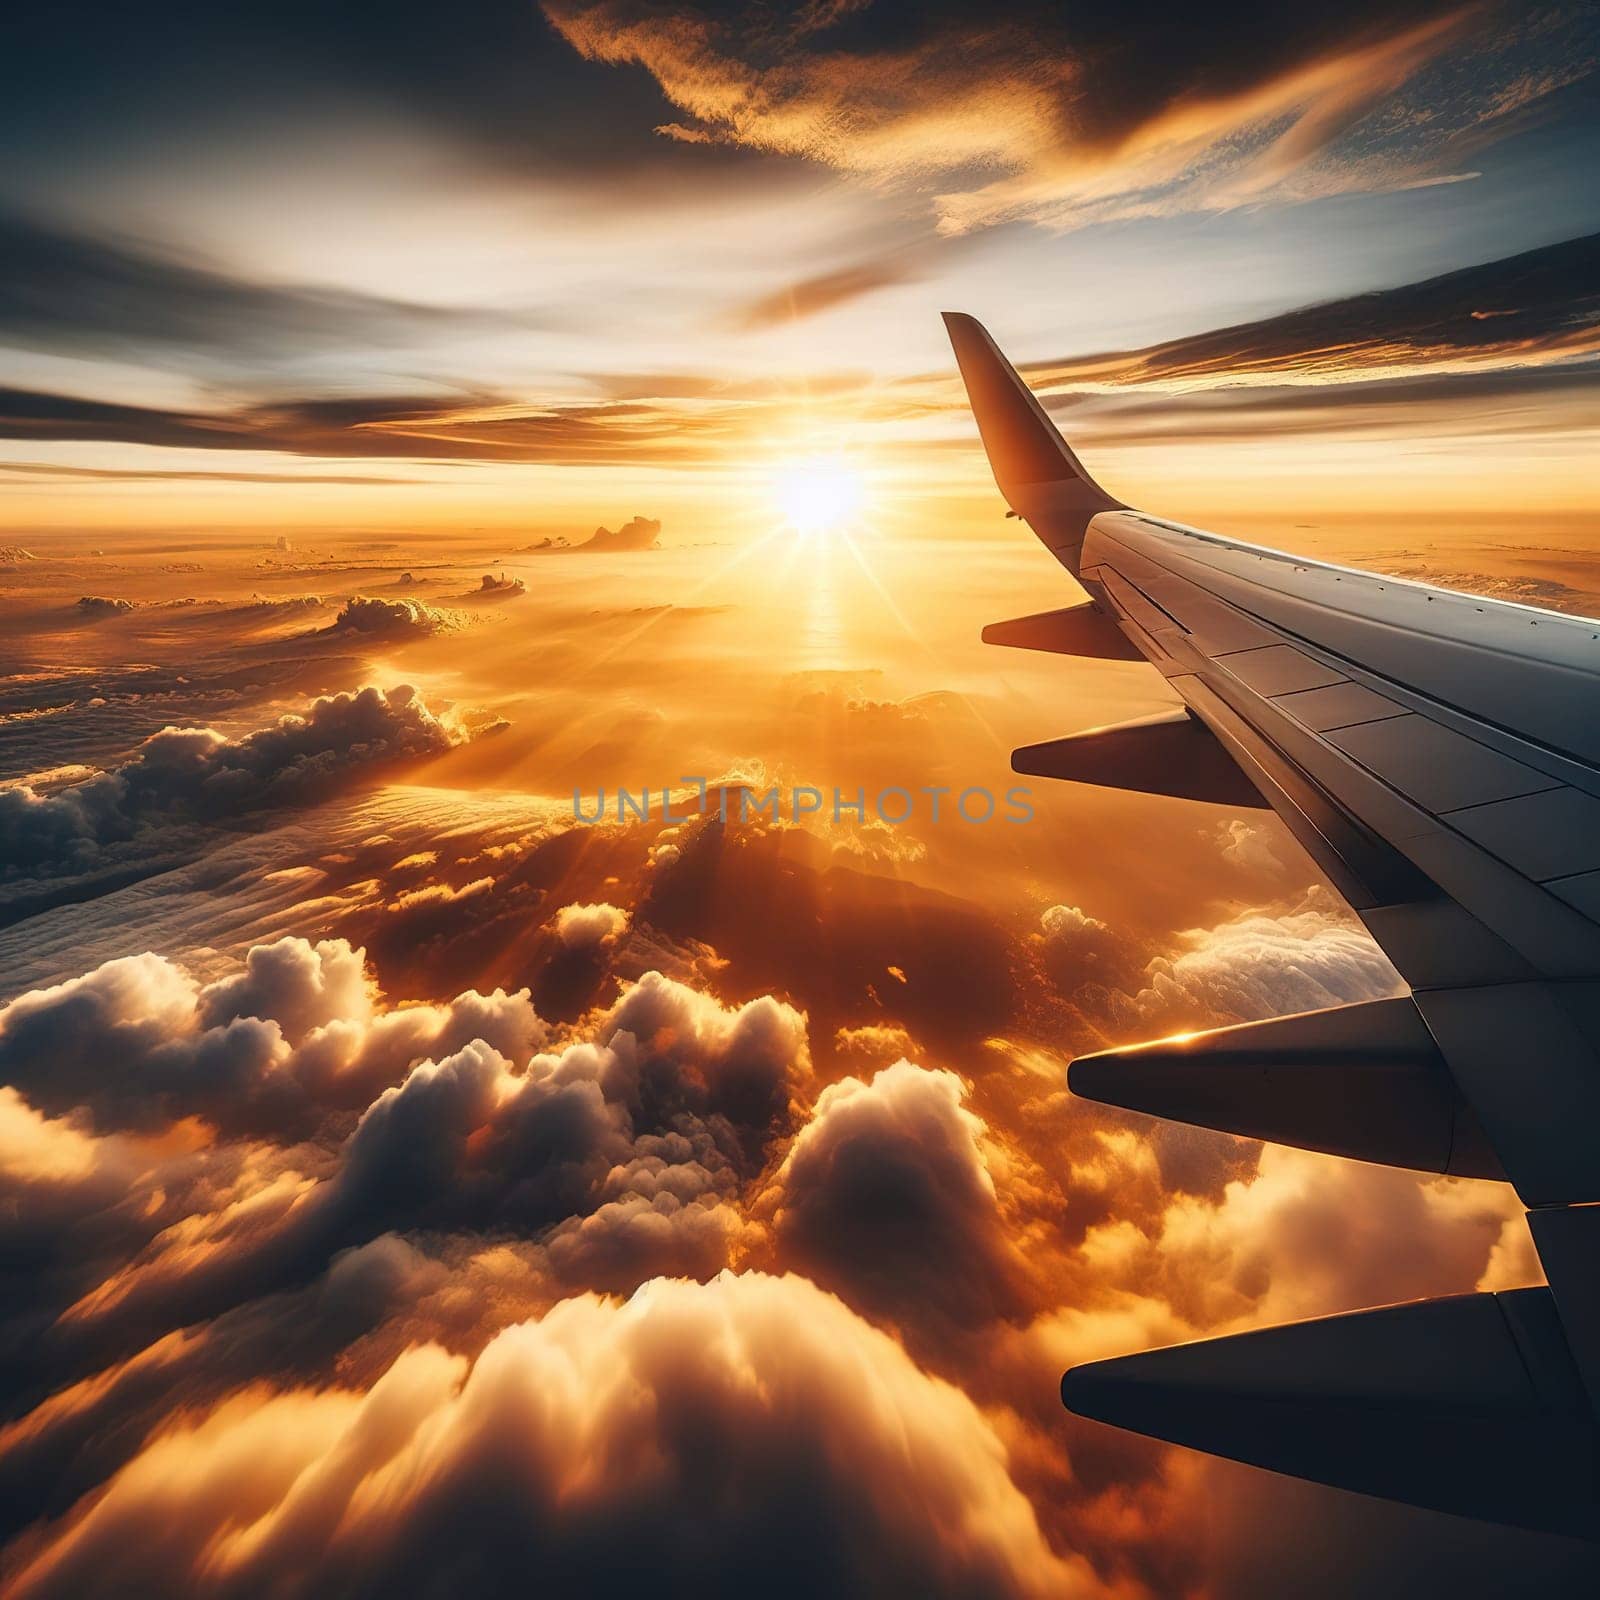 Passenger plane in the sky at sunset. High quality photo